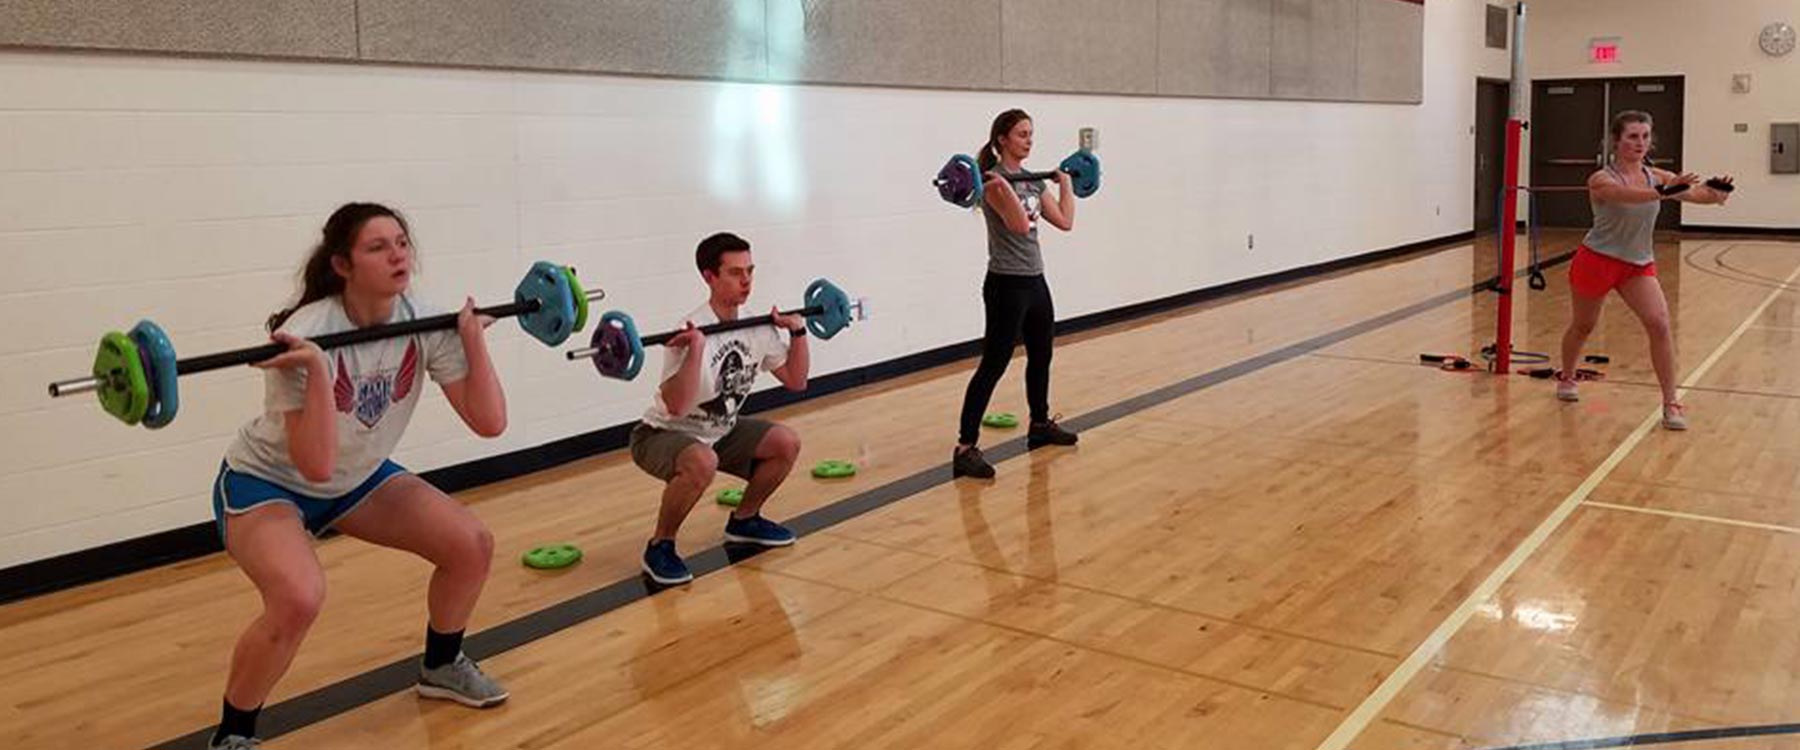 Three students squat with small barbells in a group fitness class.